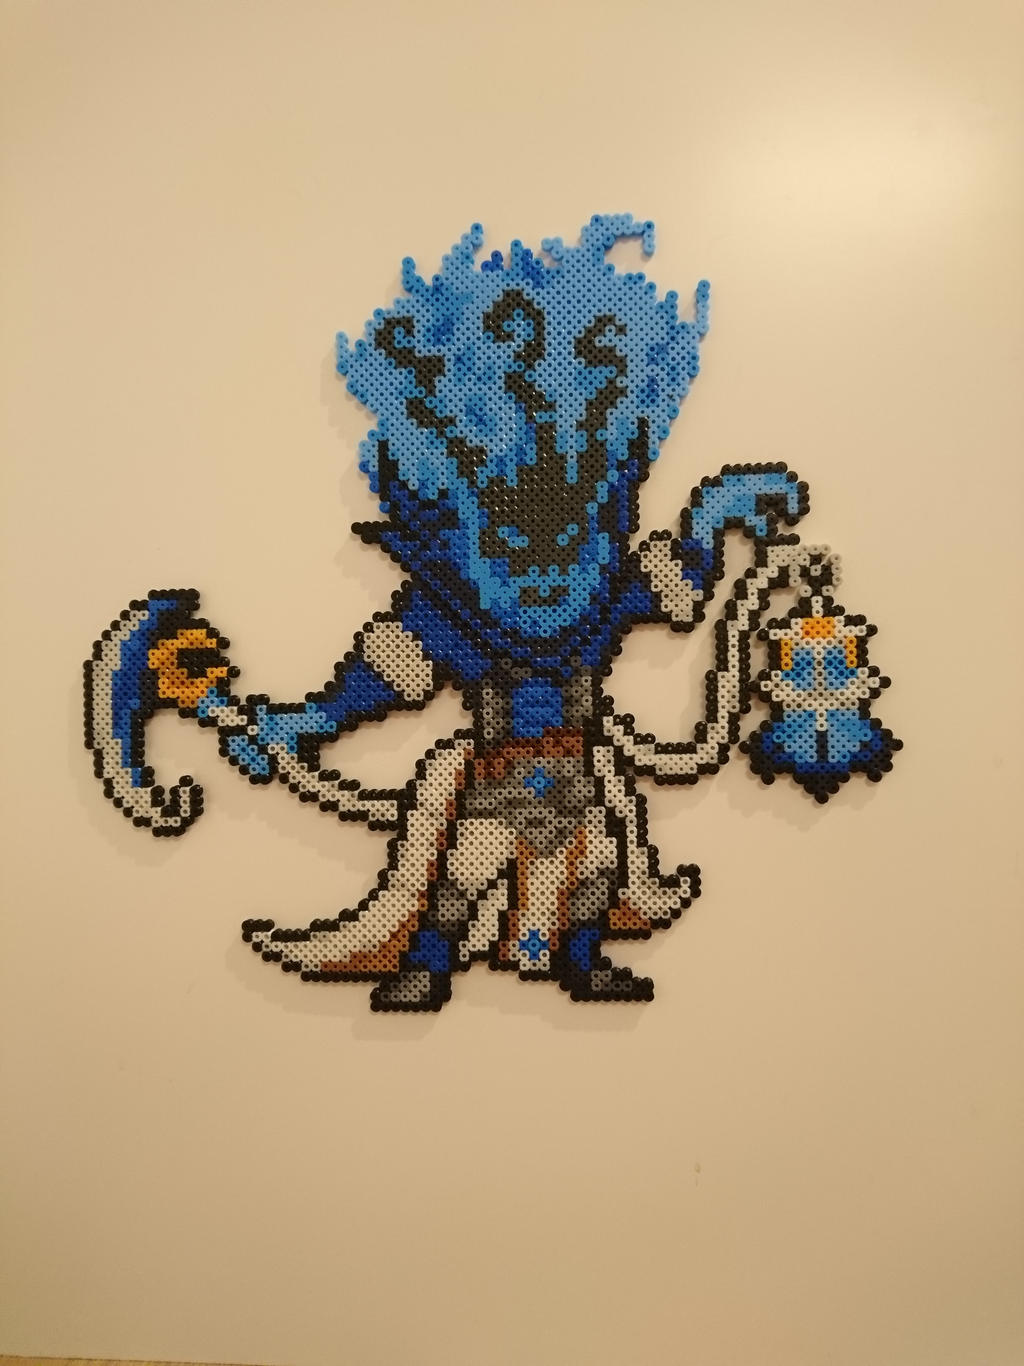 Championship Thresh from League of Legends